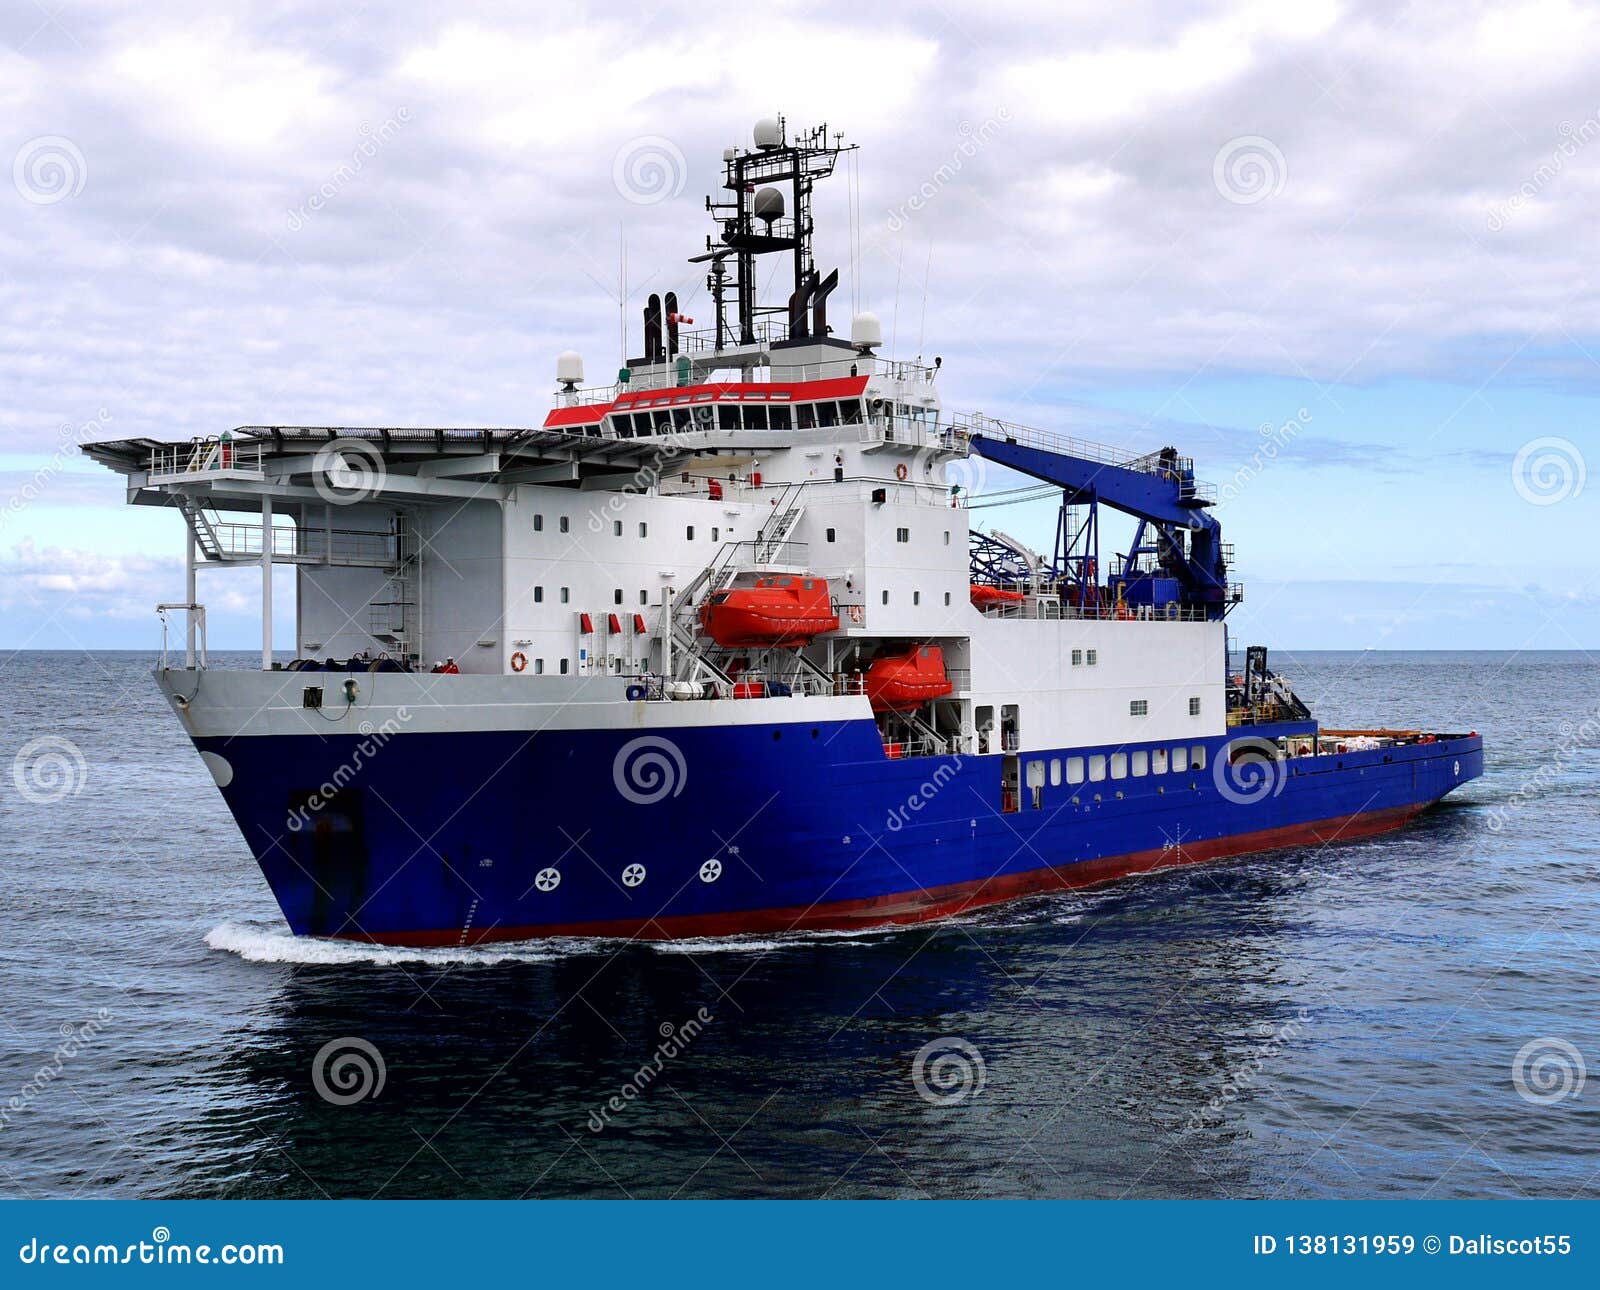 offshore support vessel at sea.